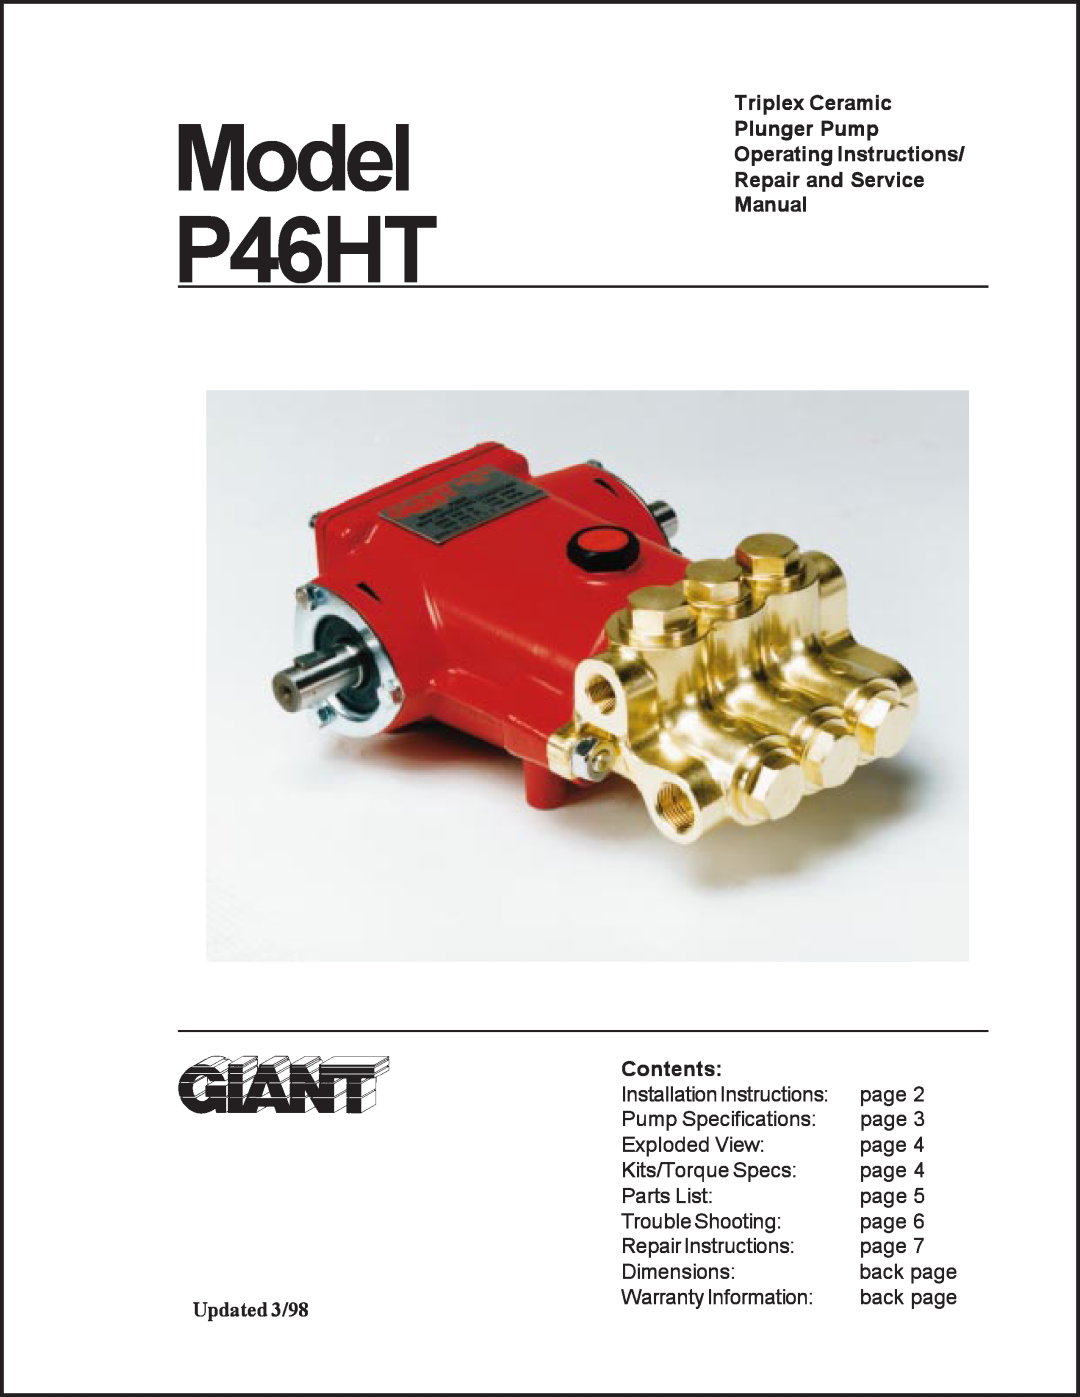 Giant P46HT installation instructions Triplex Ceramic Plunger Pump Operating Instructions, Repair and Service Manual 